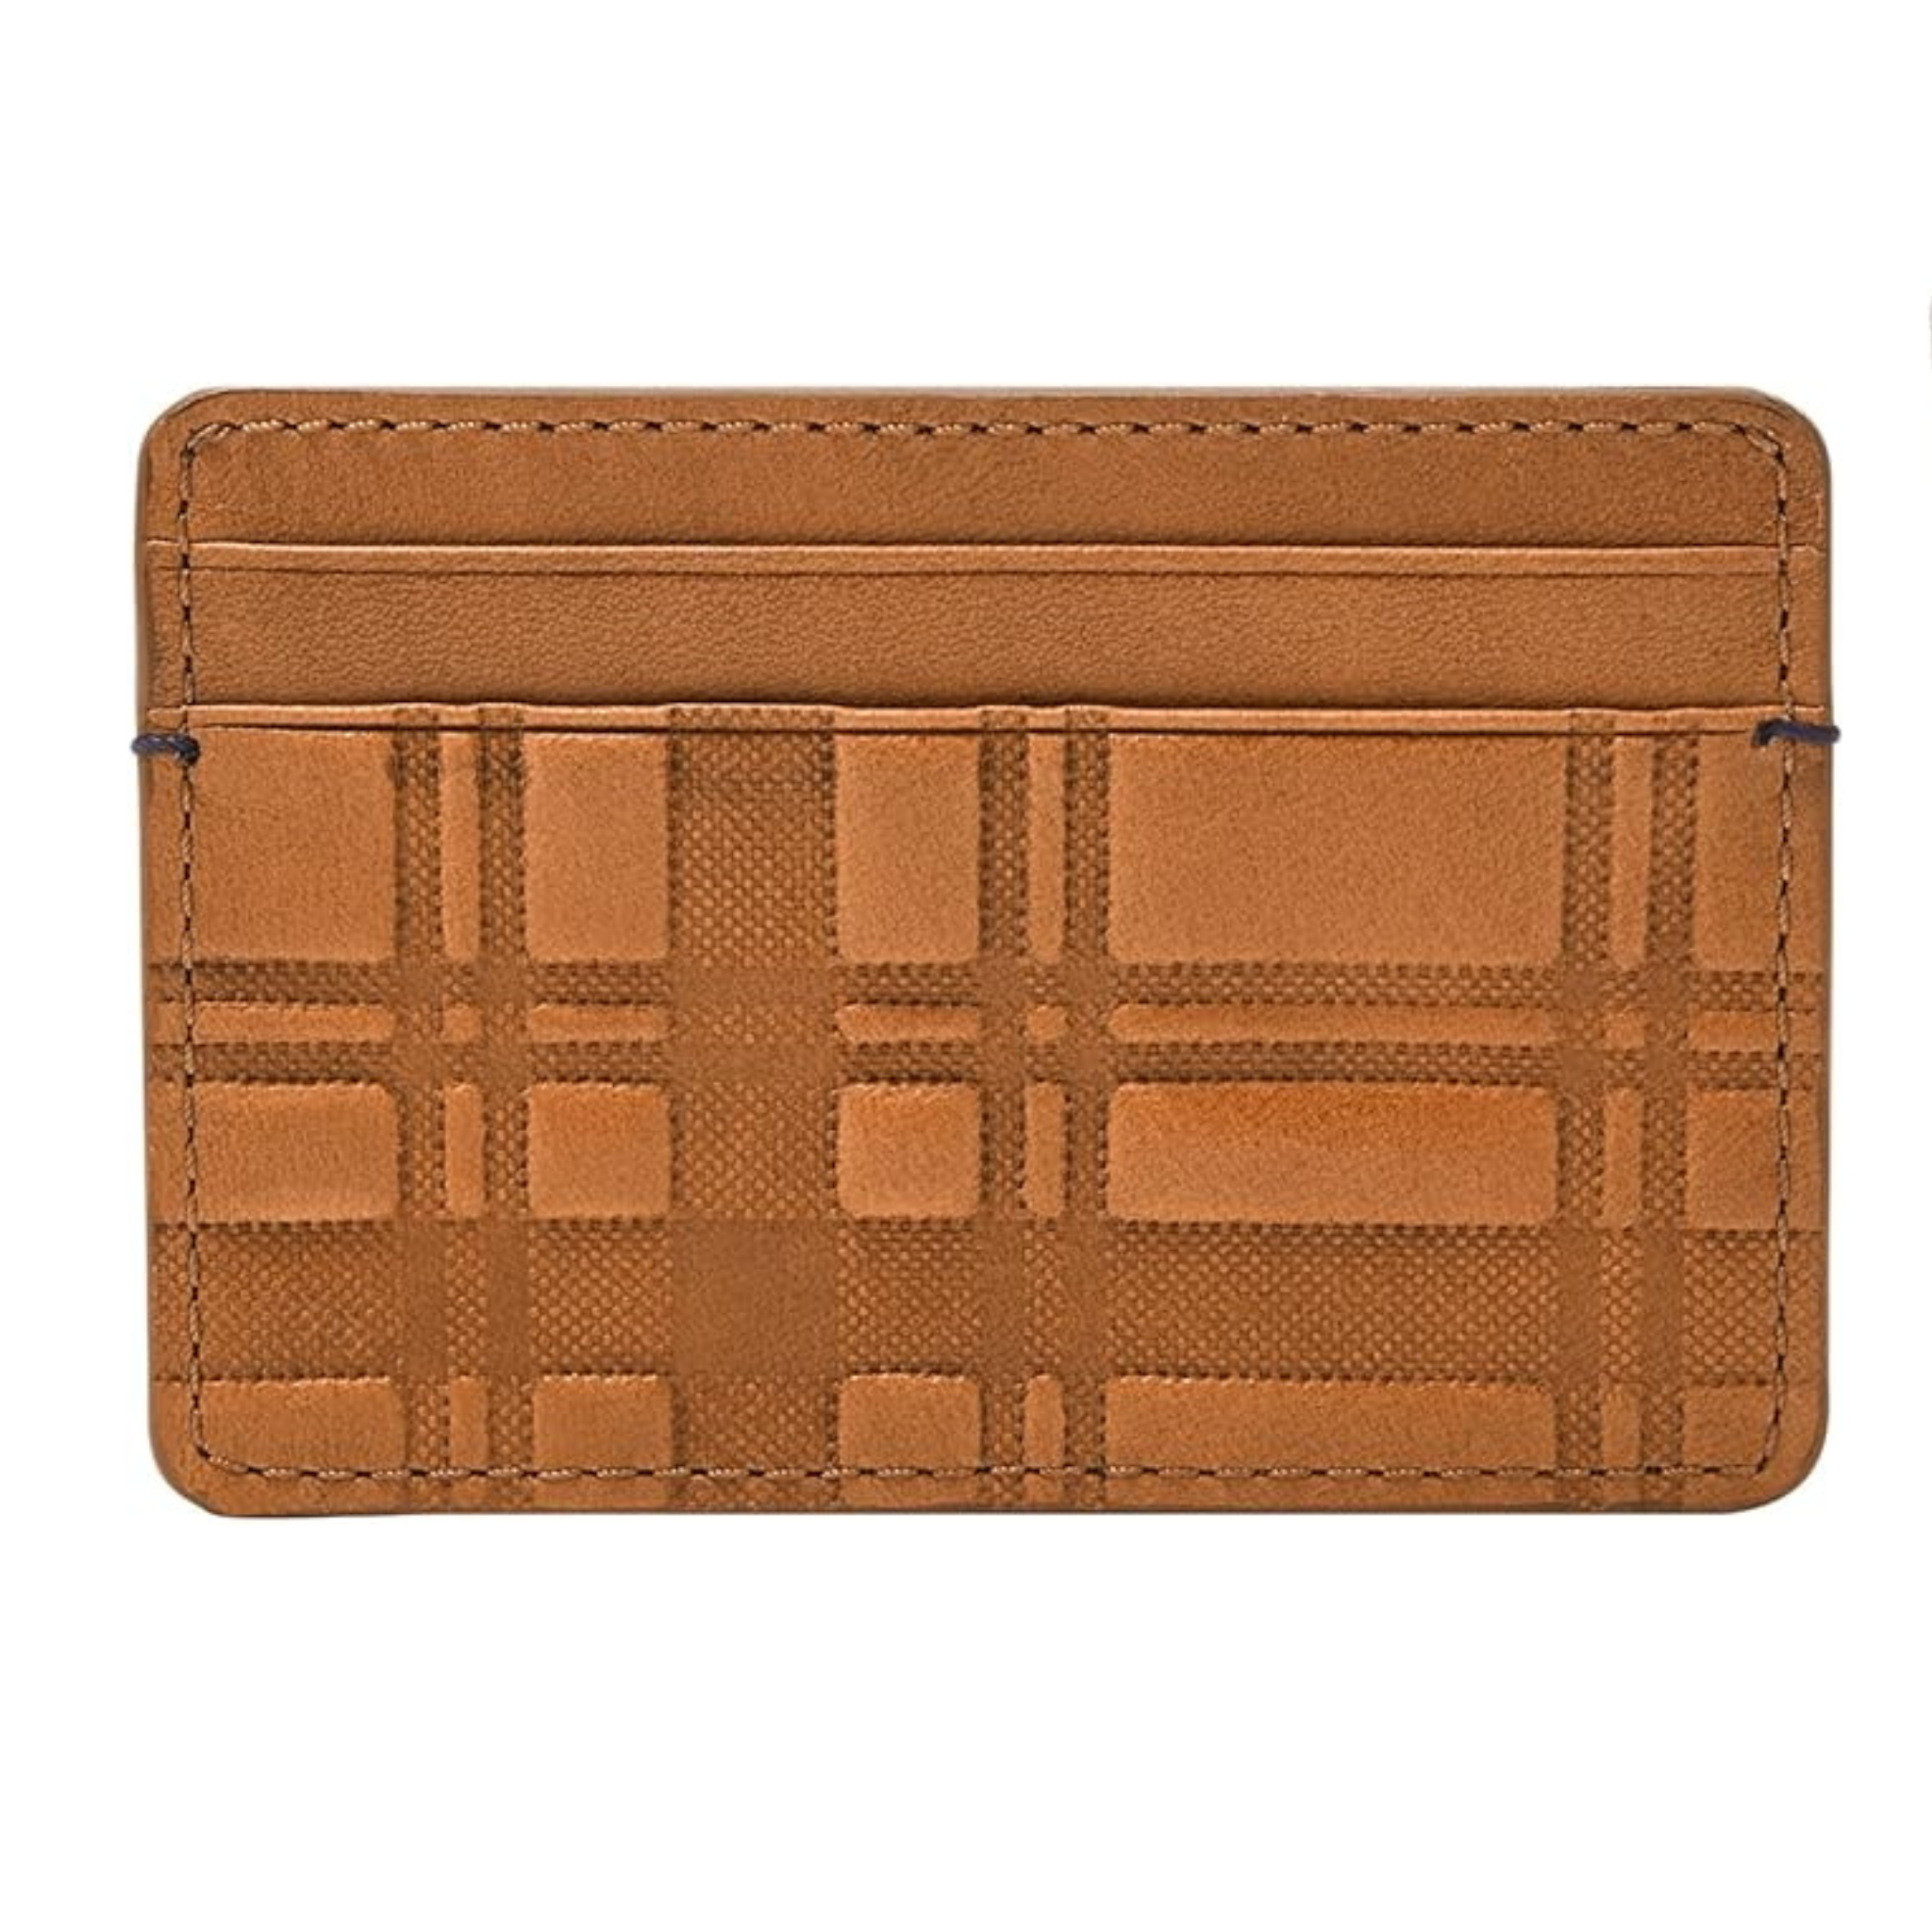 Save On Men’s And Women’s Fossil Wallets